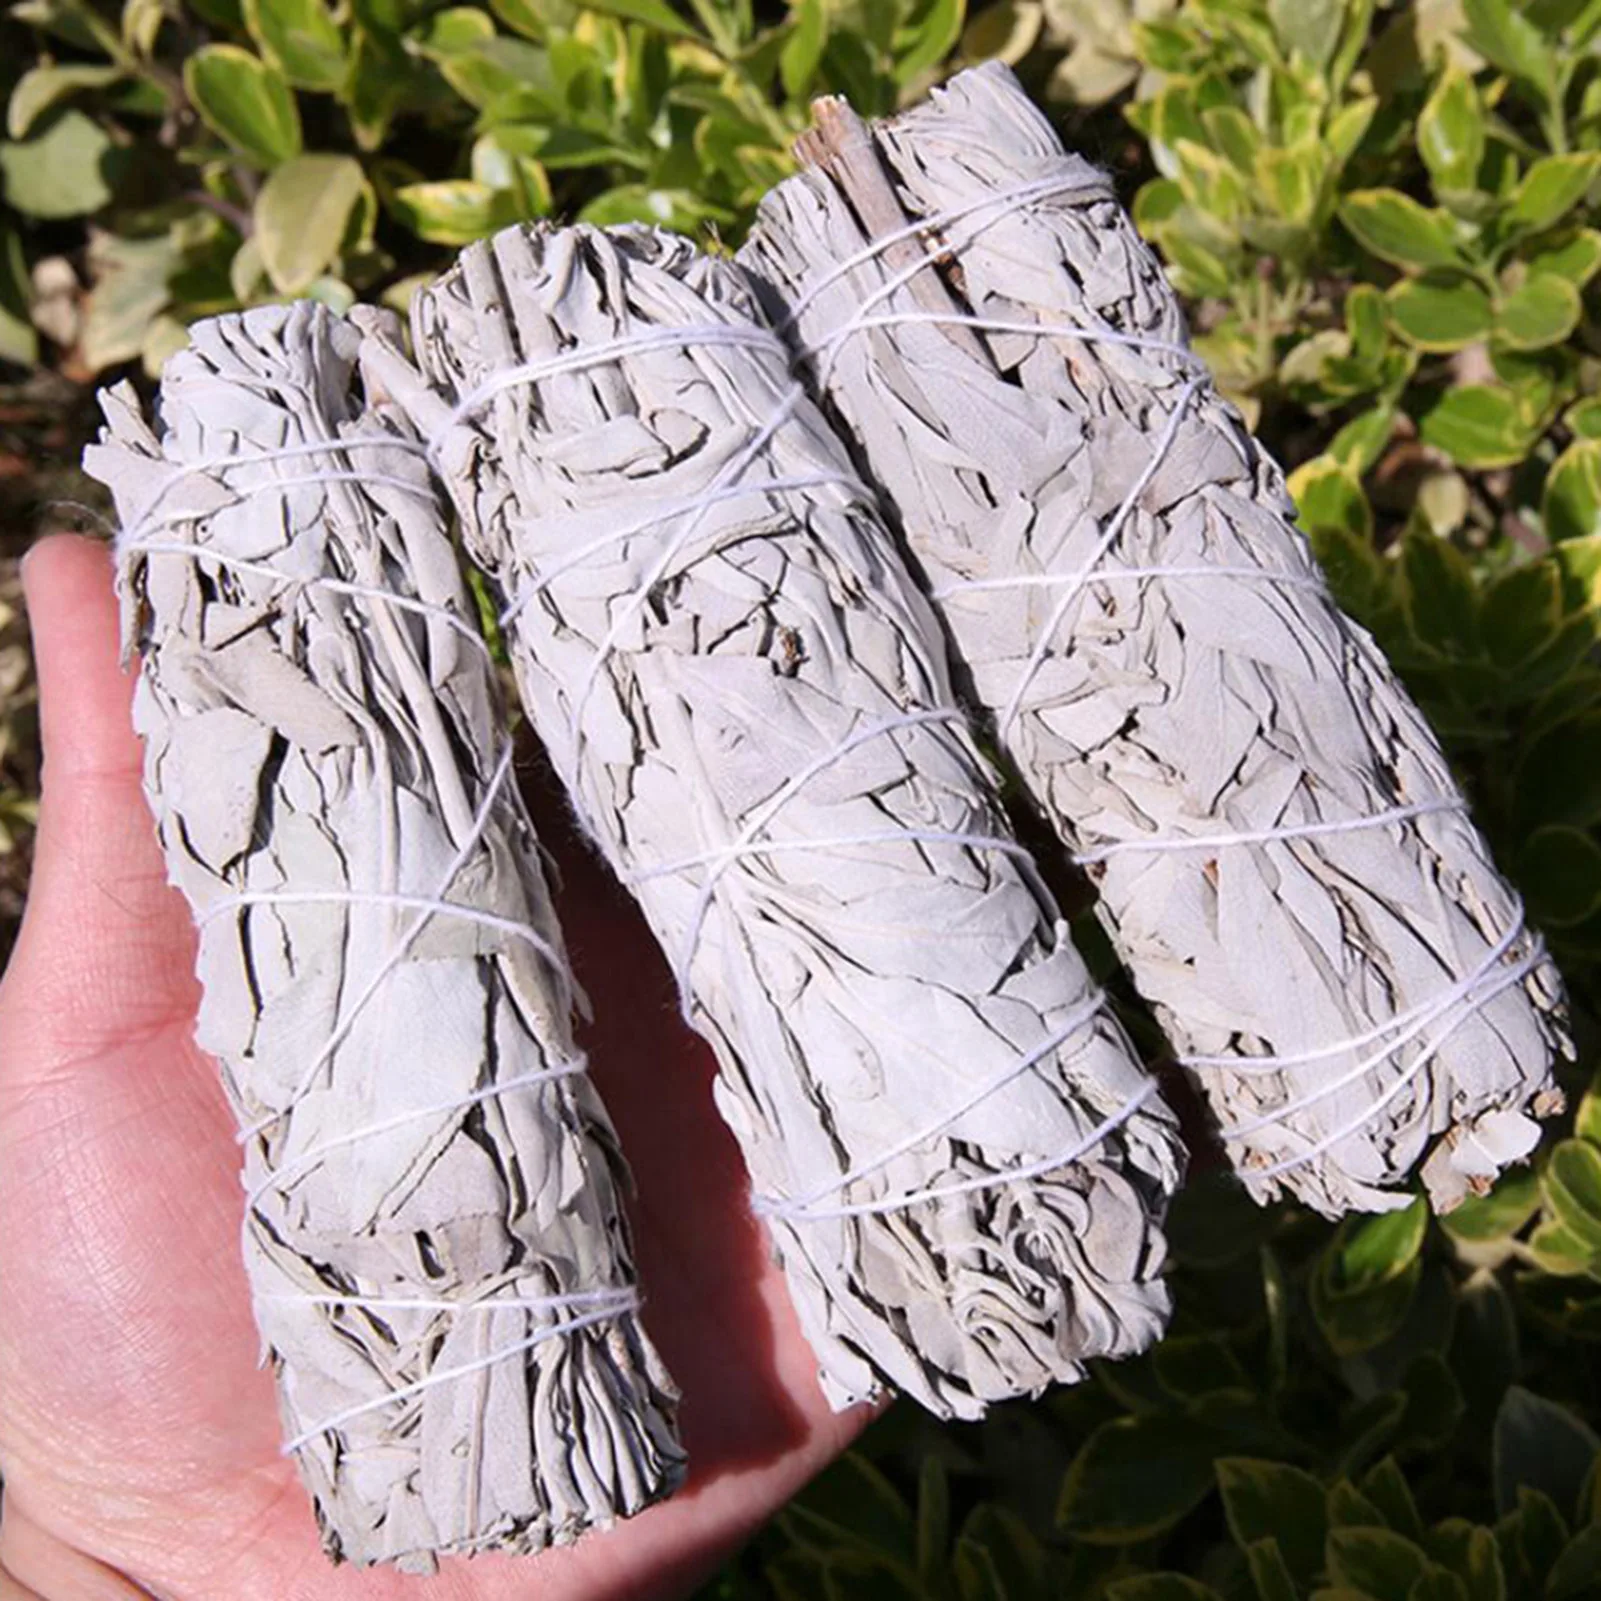 

White Sage Bundles Smudge Sticks Indoor Purification Smoking For Home Cleansing Healing Meditation Smudging Rituals Wholesale